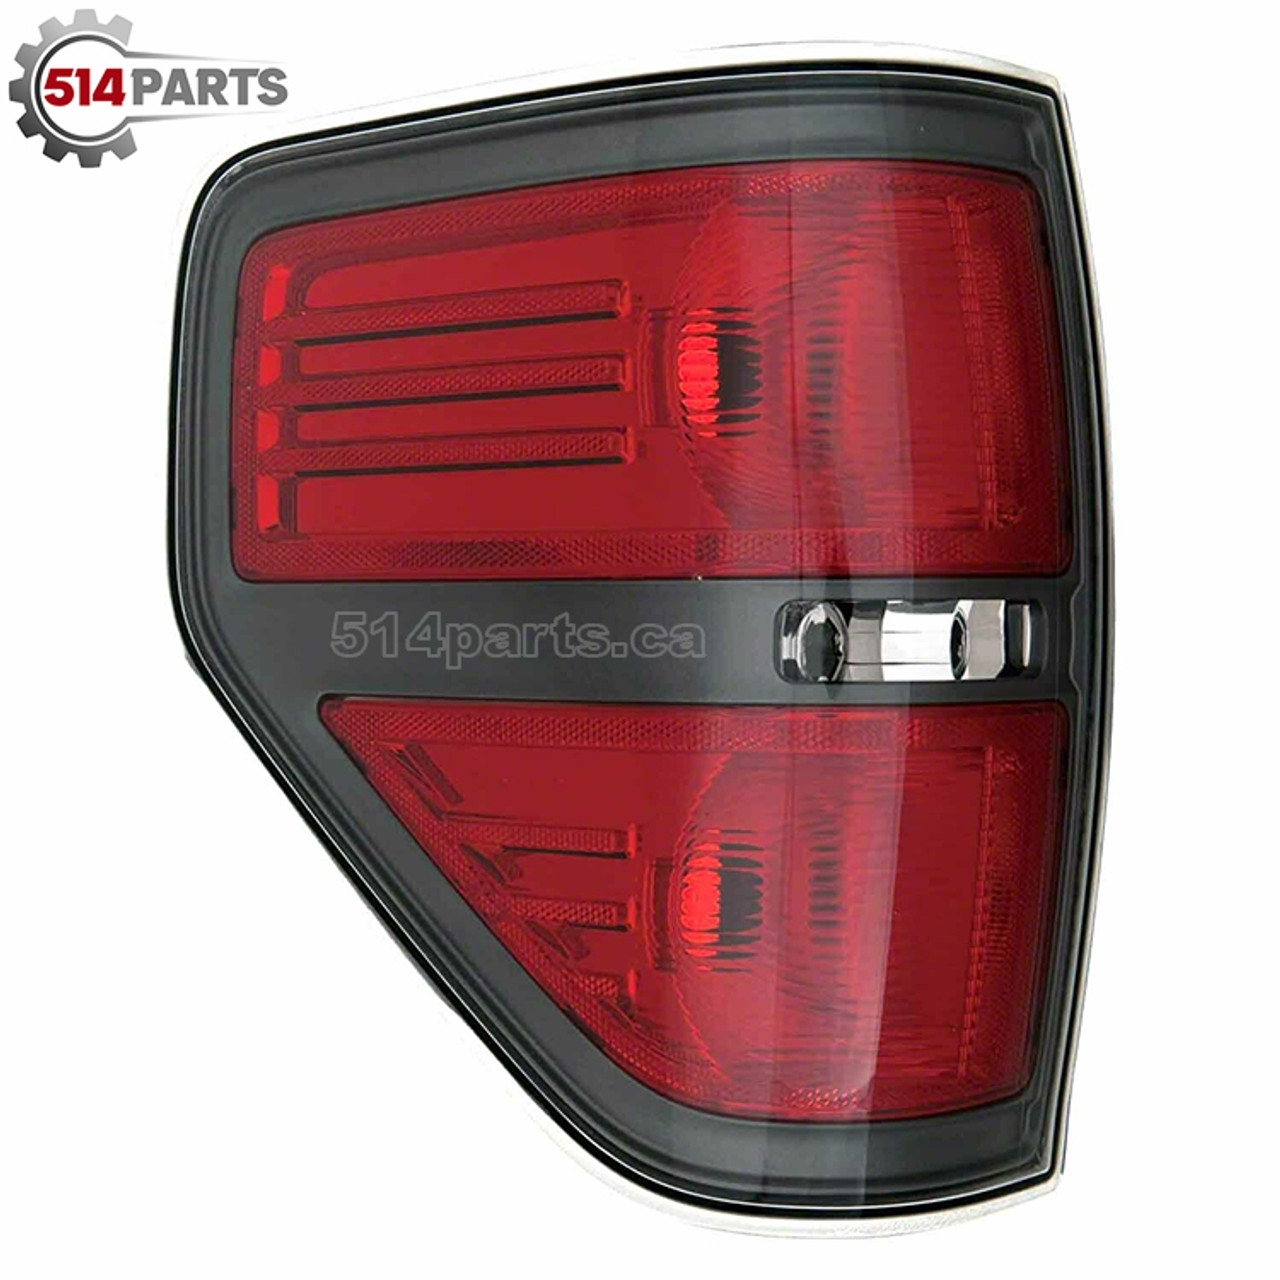 2010 - 2014 FORD F150 FX2 TAIL LIGHTS High Quality - PHARES ARRIERE Haute Qualite